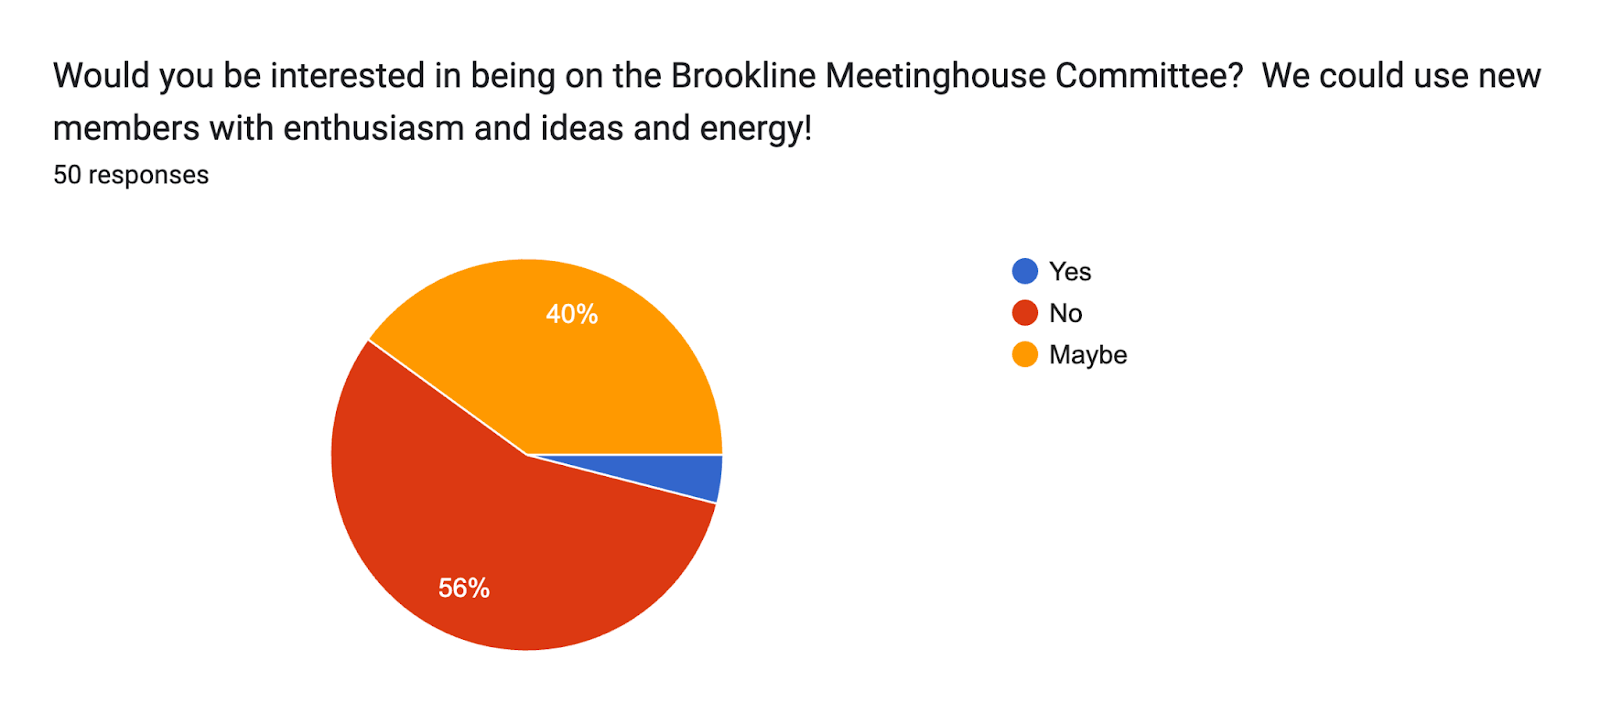 Forms response chart. Question title: Would you be interested in being on the Brookline Meetinghouse Committee?  We could use new members with enthusiasm and ideas and energy!
. Number of responses: 50 responses.